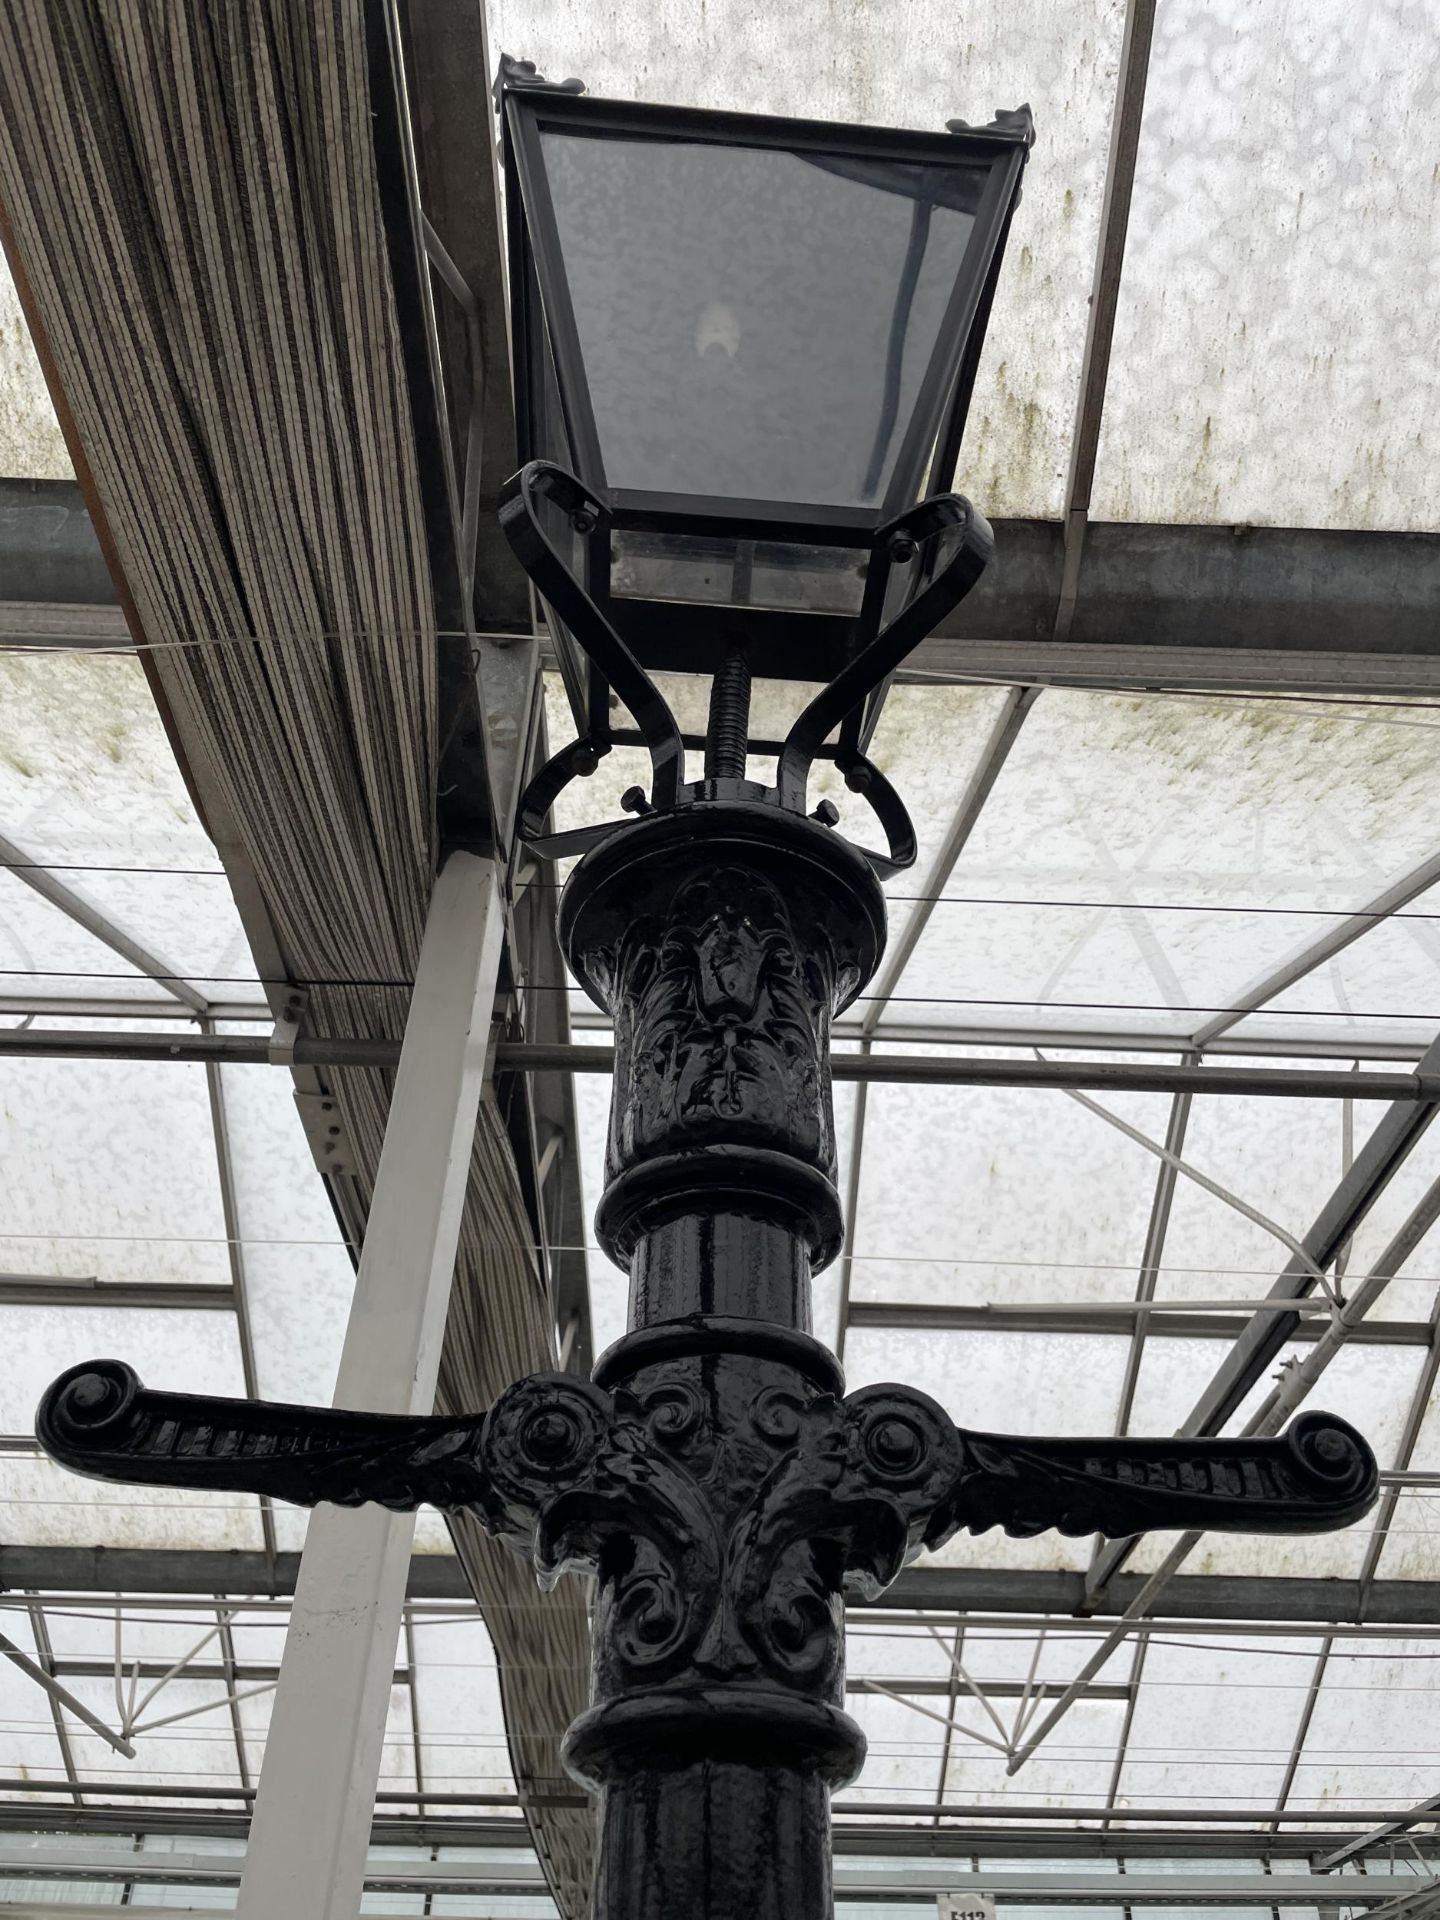 A VINTAGE DECORATIVE CAST ALLOY ELECTRIC STREET LAMP POST WITH COPPER TOP - Image 3 of 5